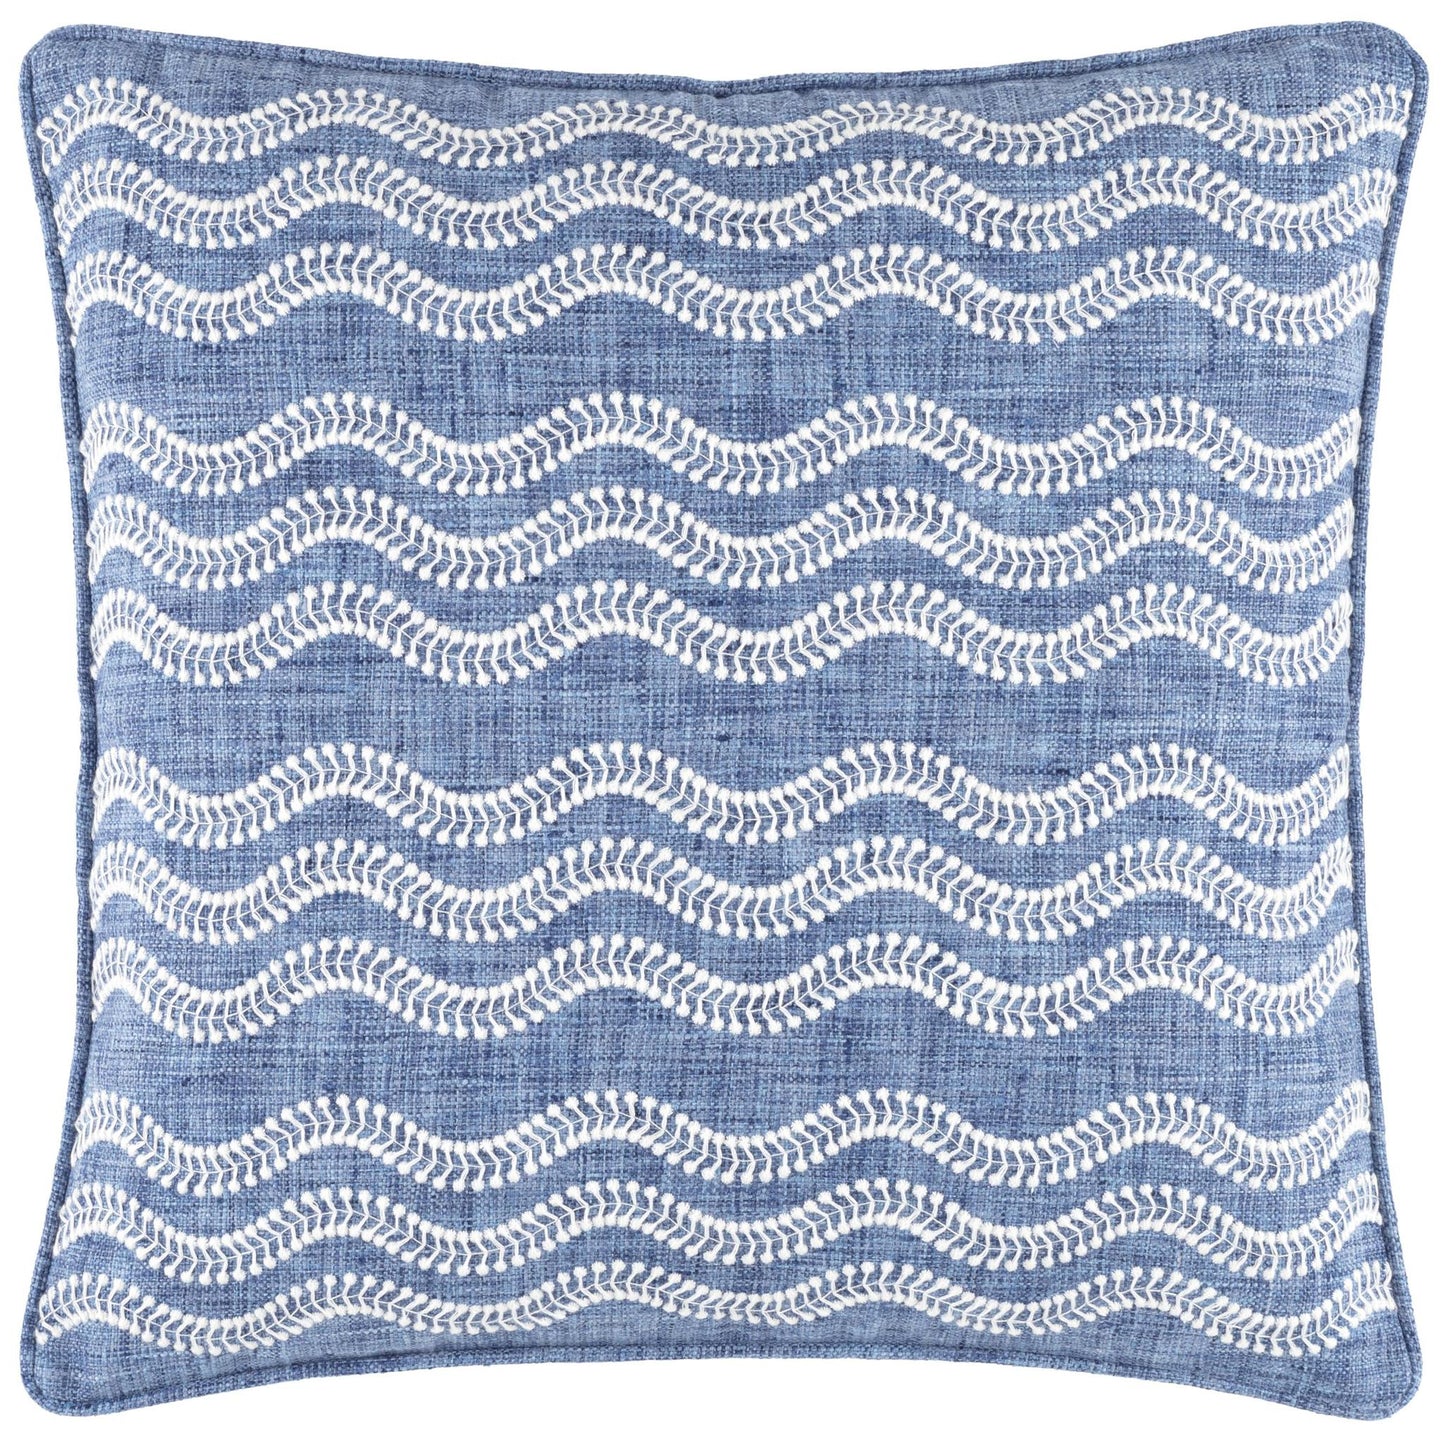 Pillow - "Scout" Embroidered French Blue - Indoor/Outdoor - 20"